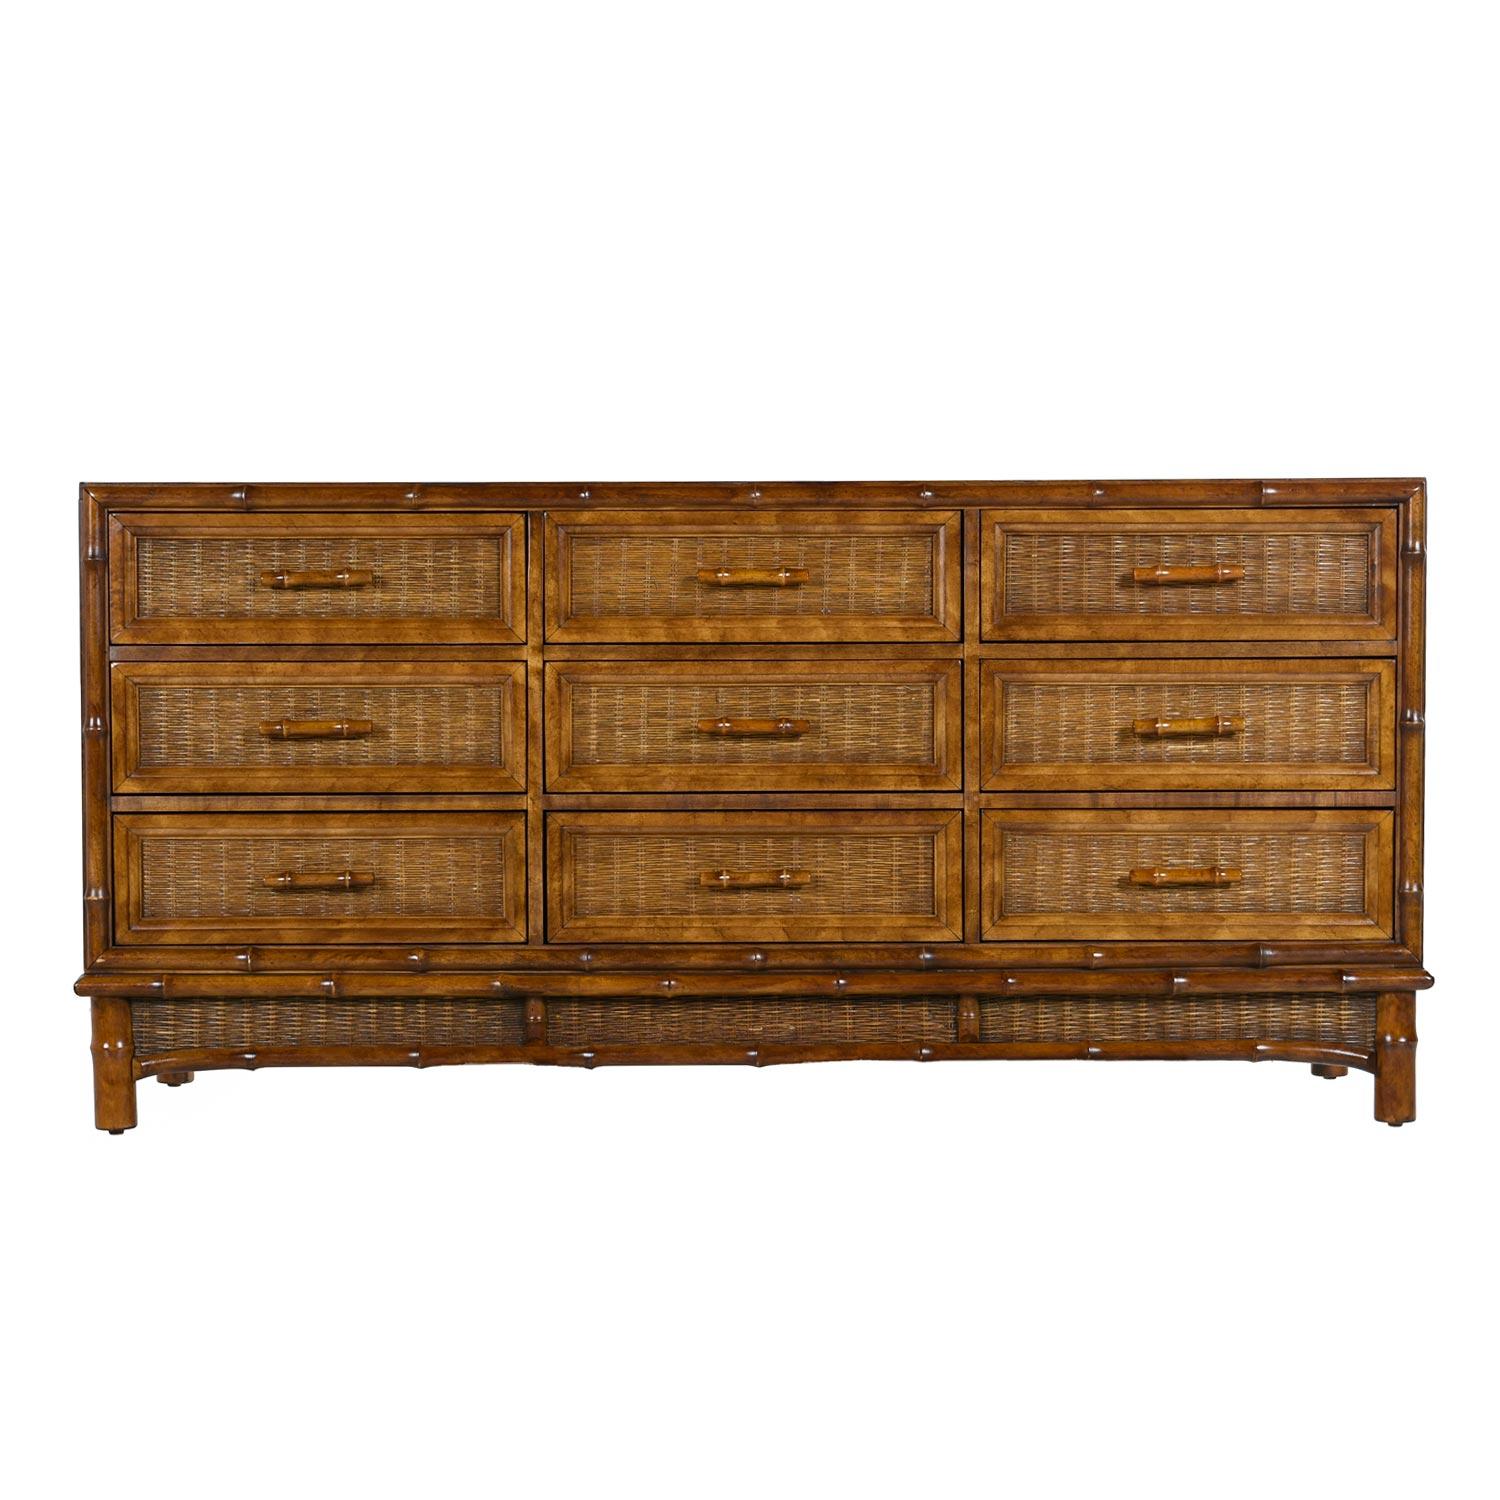 This Bohemian meets Tommy Bahama dresser features woven wicker edifices on the drawers. The Florida vibes are enhanced with a Ficks Reed style bamboo trim throughout. Solid, sturdy construction with all wood drawers and cabinet. The dresser is ideal